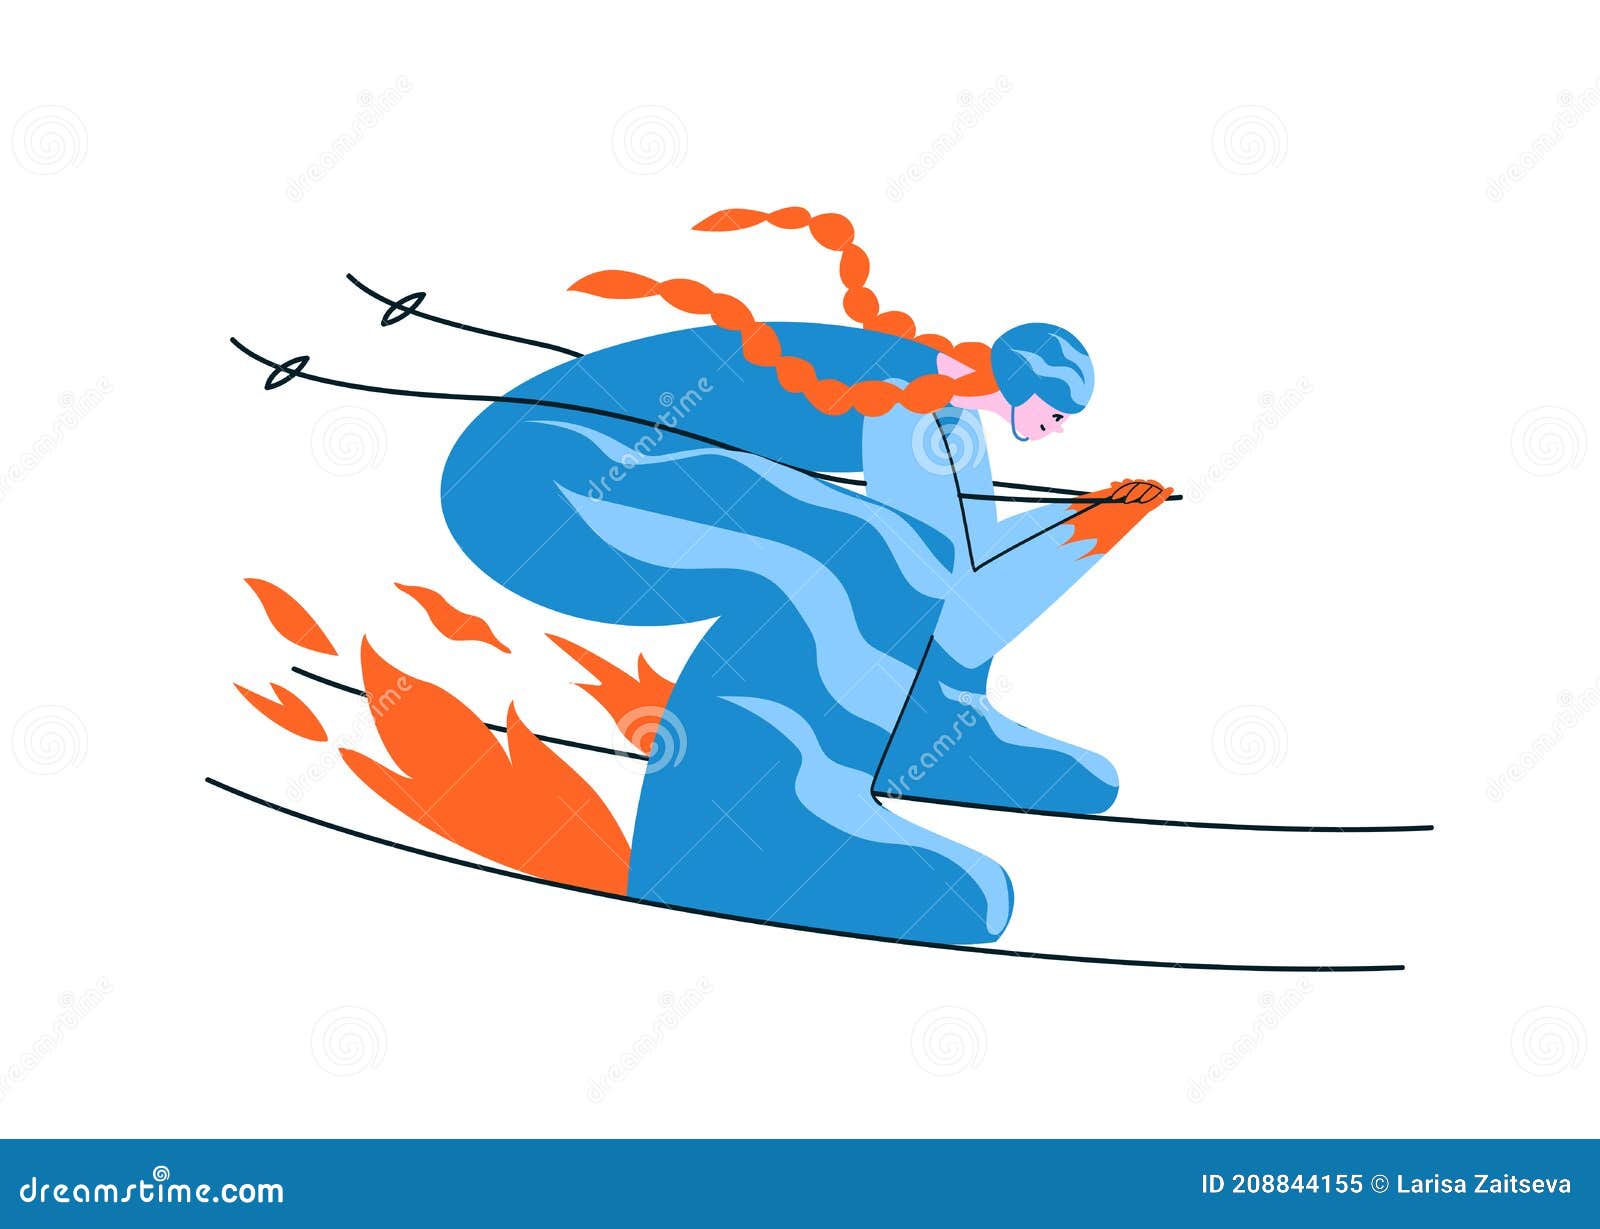 hand-drawn redhead girl skier in a blue suit. a young woman skis in an aerodynamic pose at full speed that the fire under the skis